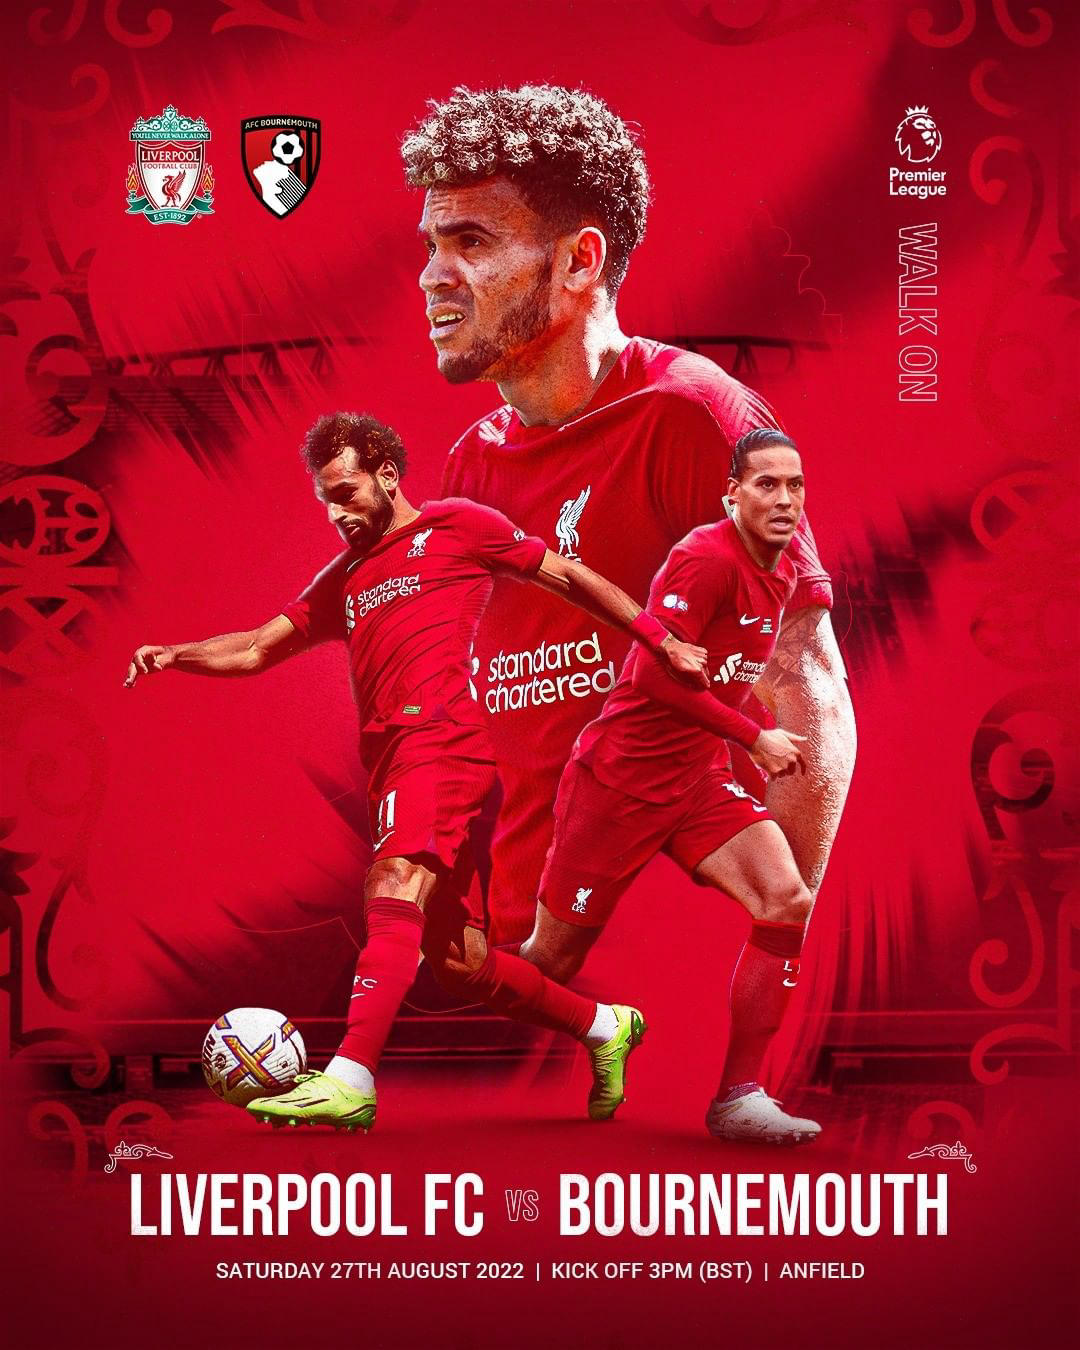 image  1 Liverpool Football Club - Back at Anfield as we take on #officialafcb in the #premierleague